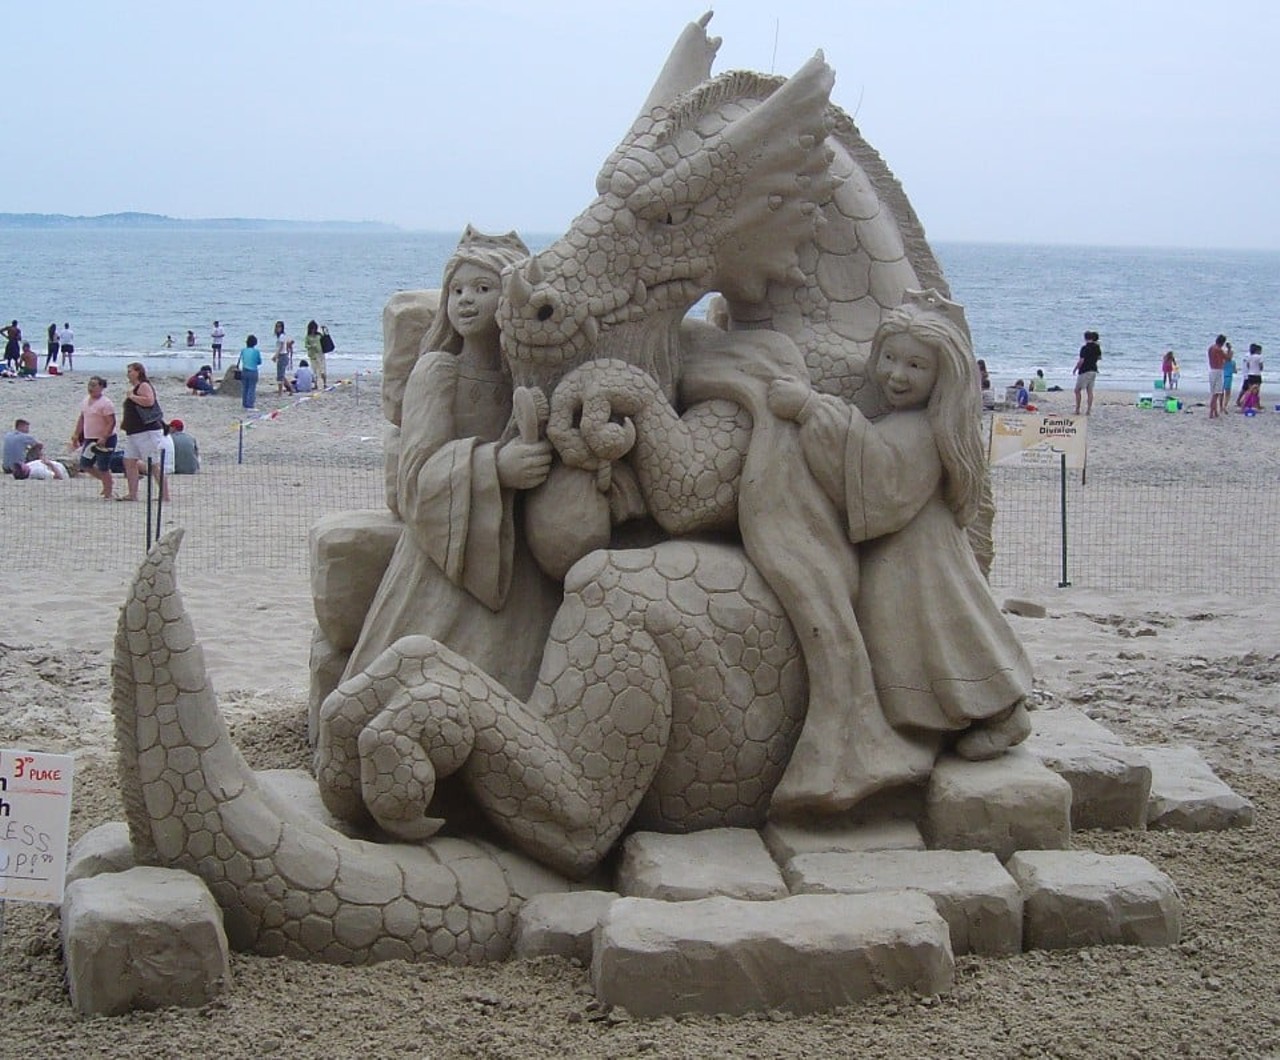  Headlands Beach Fest
When: July 15th
Where: Mentor Headlands Beach State Park
Price: Free
What: Food Trucks, Master Sand Sculpting Competition, Arts and Crafts Vendors, All-Day Entertainment, an ‘Ultimate Beach Party’ and More